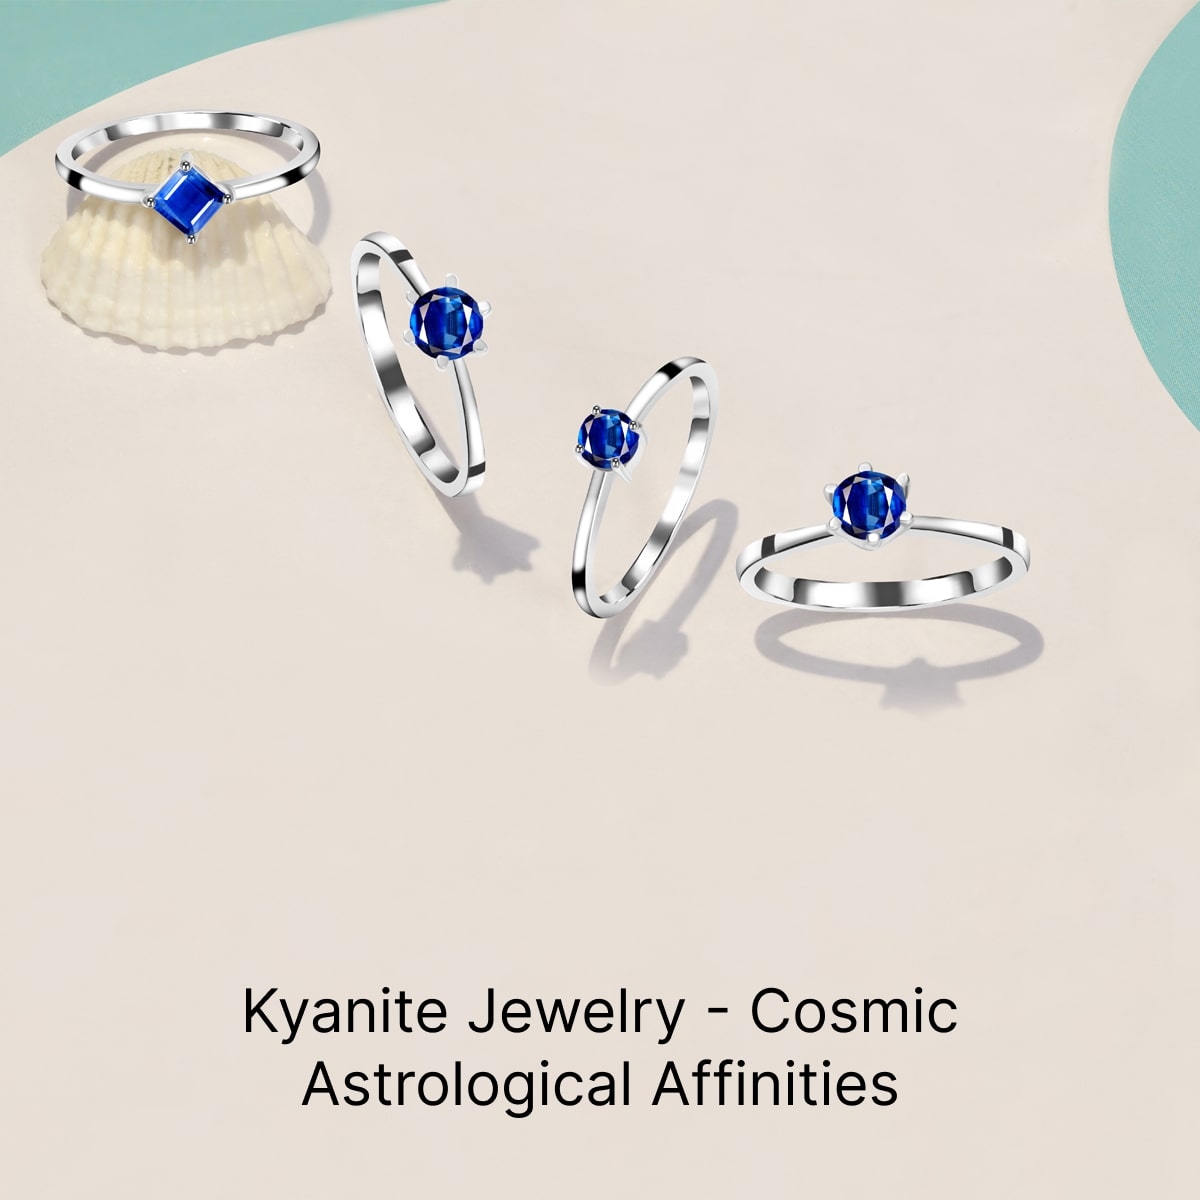 Consortium of Kyanite Jewelry with Astrology